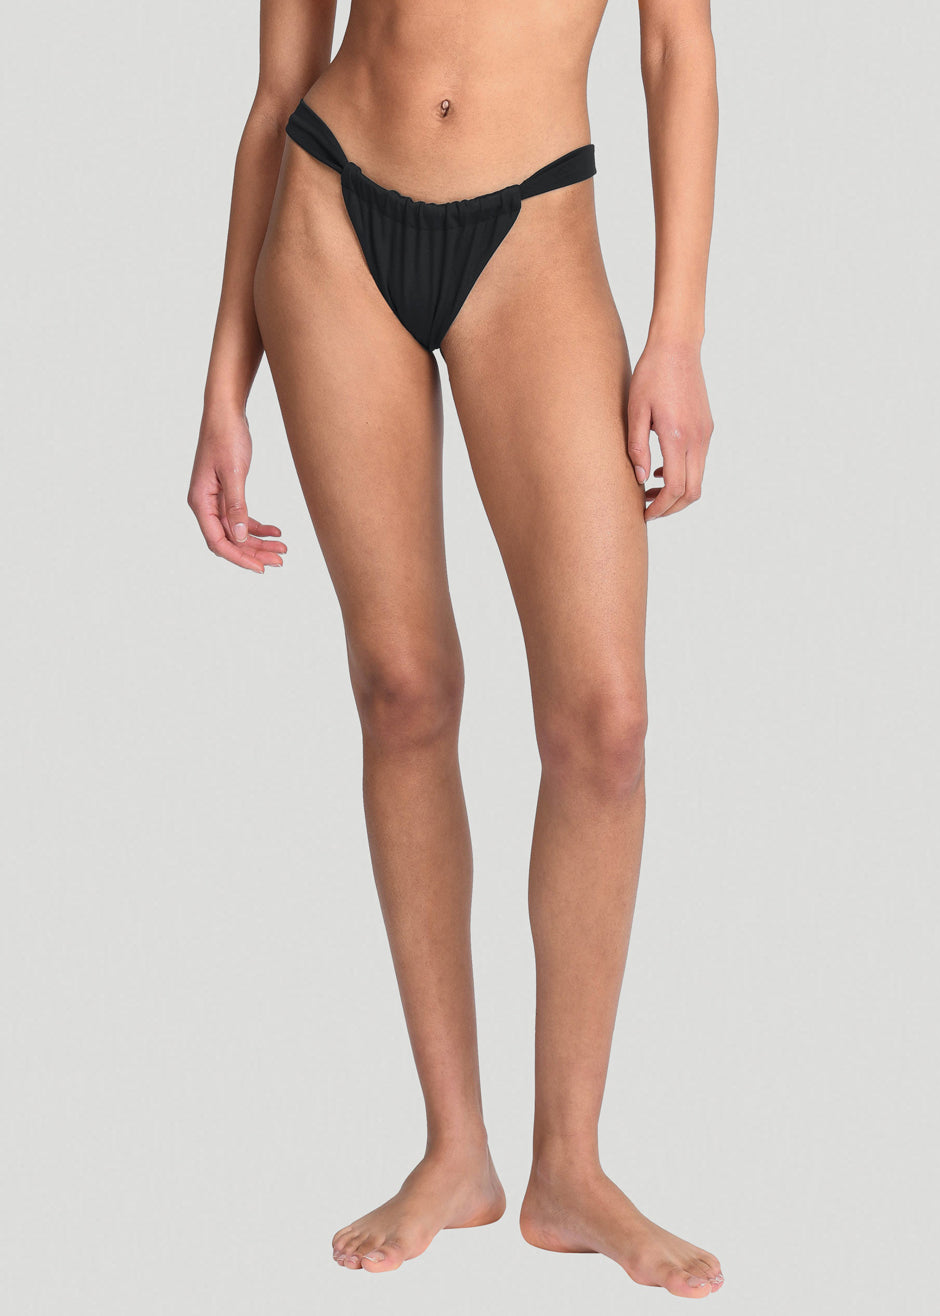 Aexae Ruched Swimsuit Bottoms - Black - 2